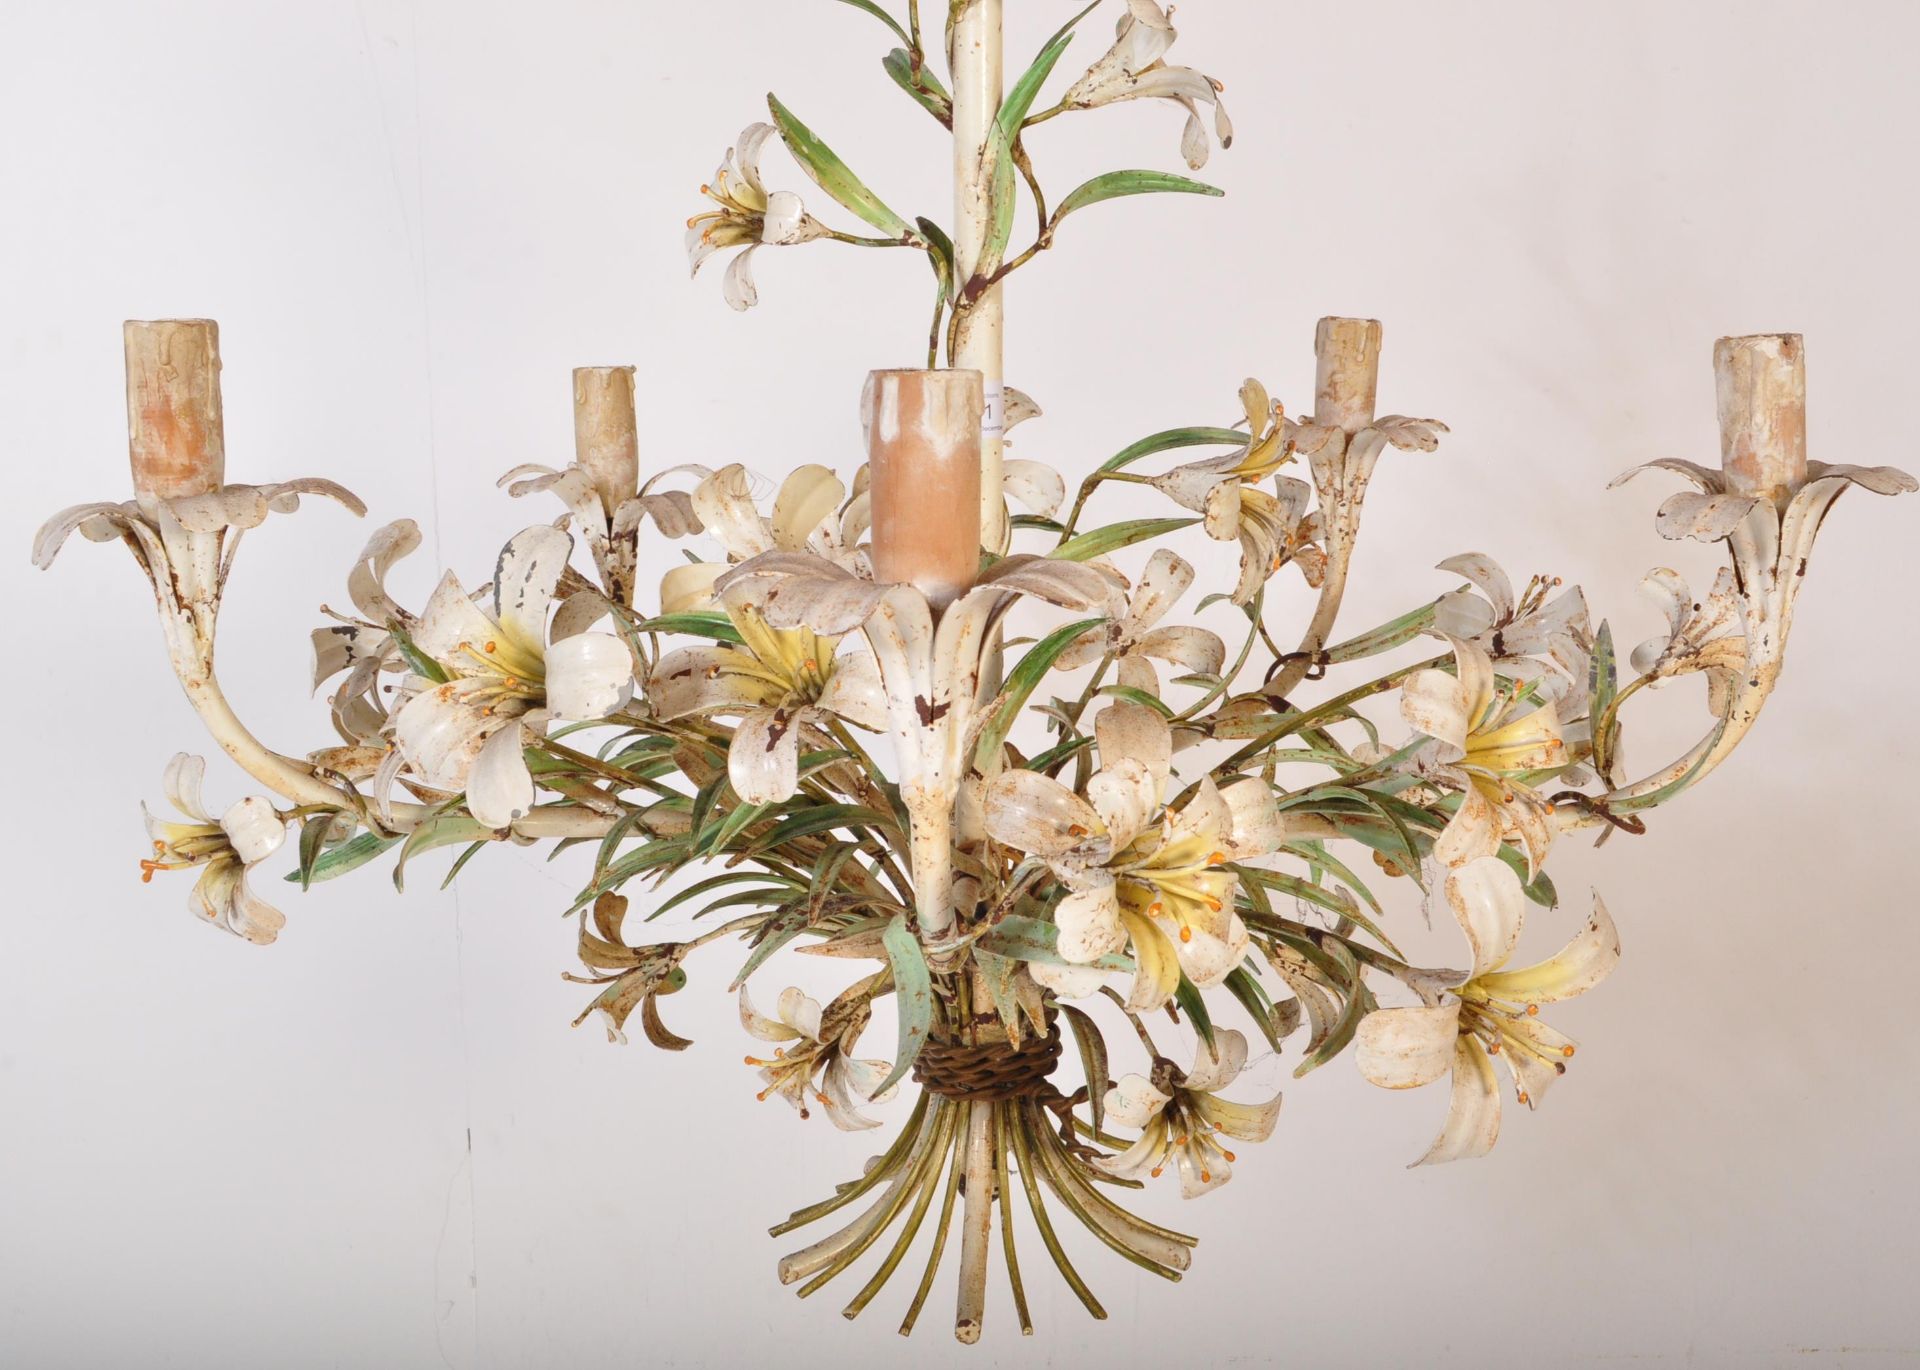 MID 20TH CENTURY ITALIAN TOLEWARE FLORAL CHANDELIER - Image 2 of 5